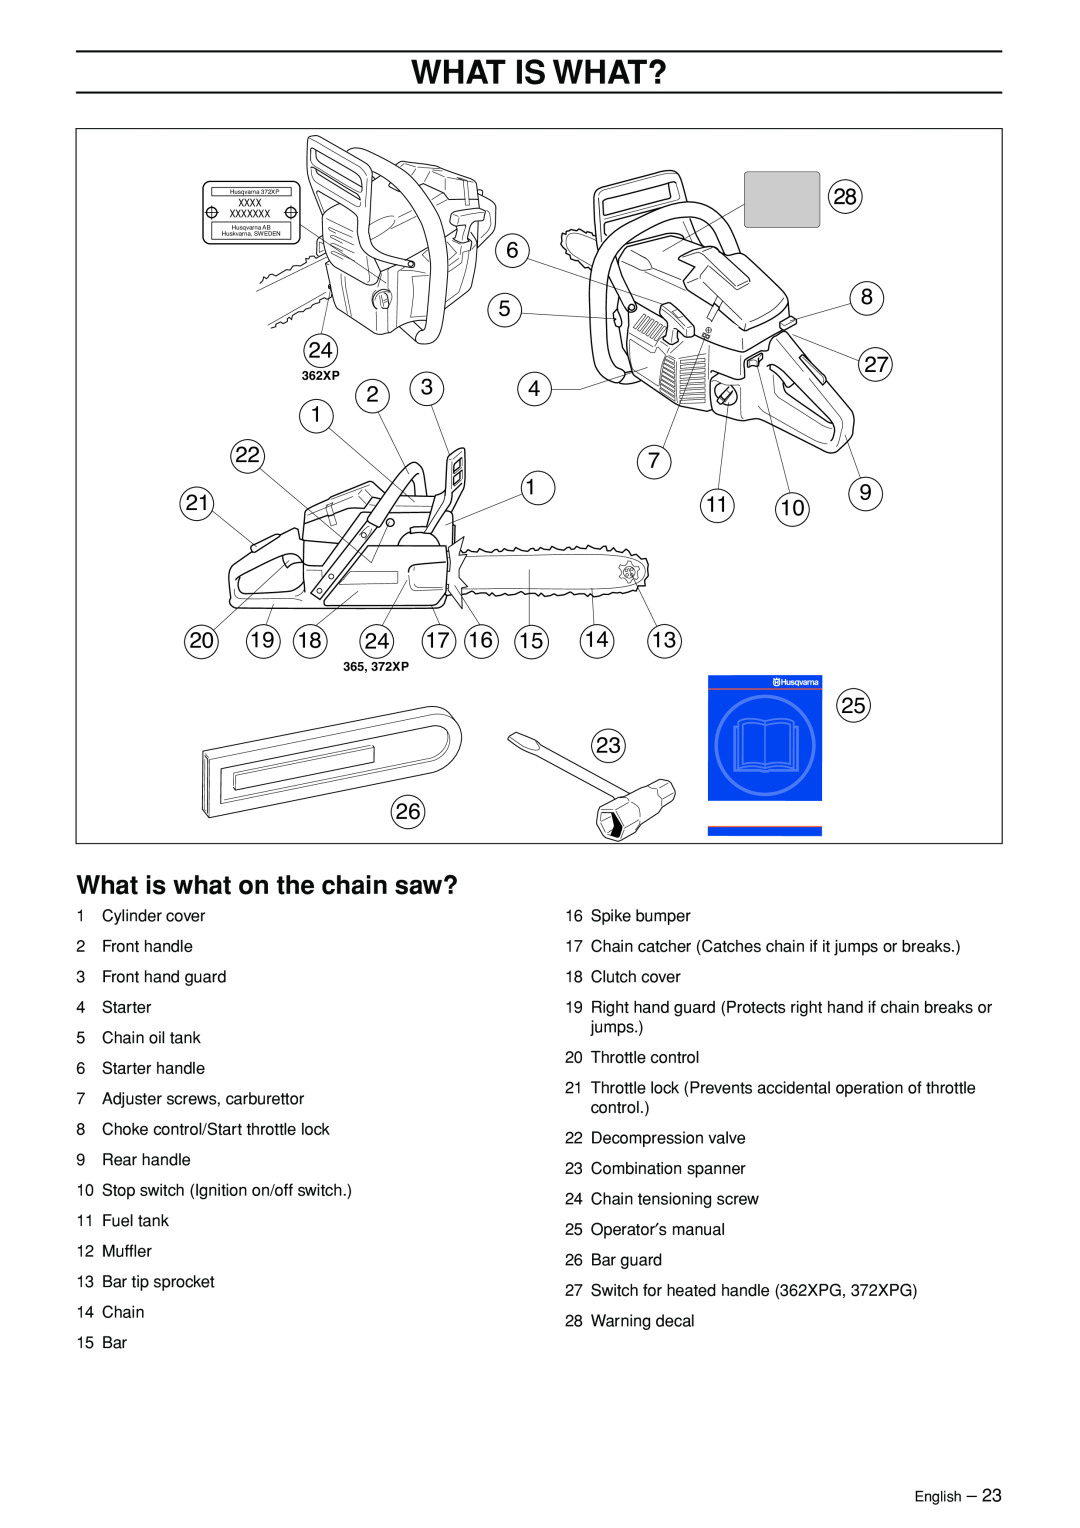 Husqvarna 372XP, 365 manual What Is What?, What is what on the chain saw? 